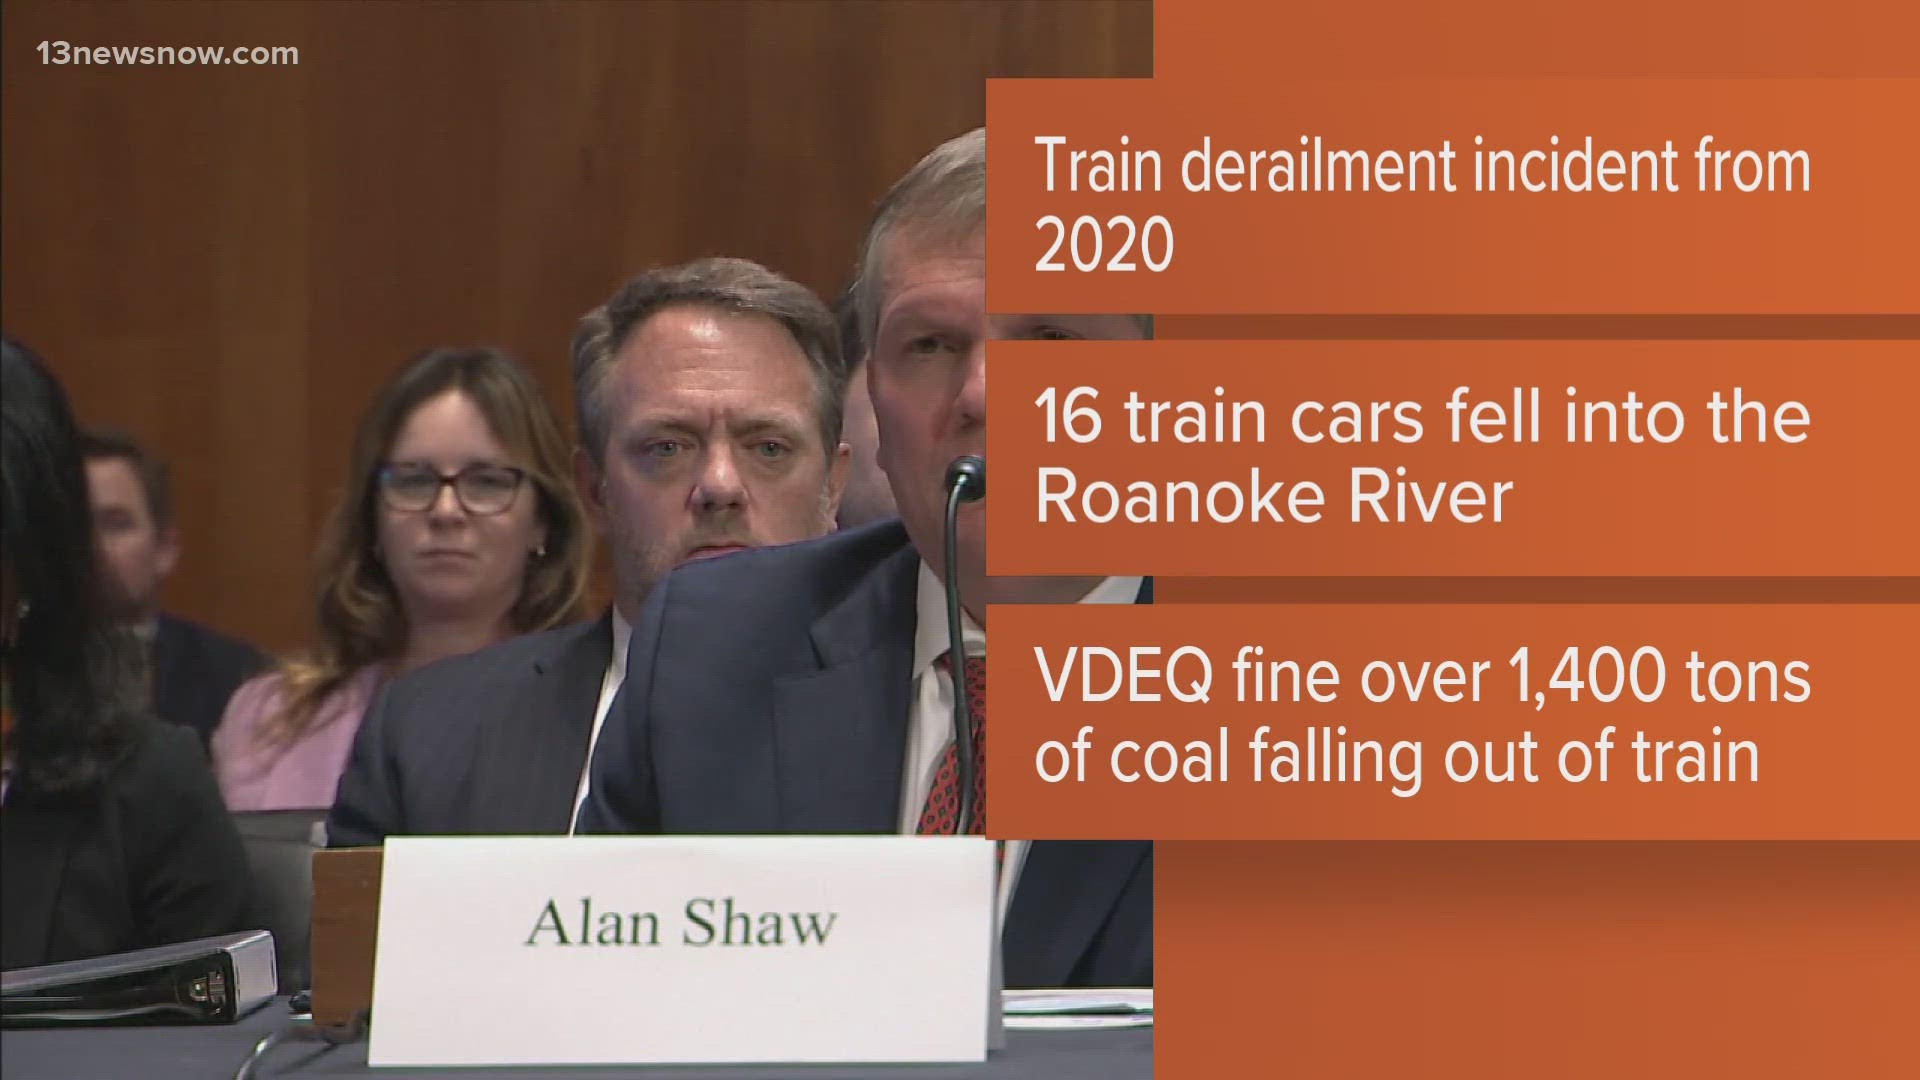 The incident dumped over 1400 pounds of coal into the waterway. Since the derailment of toxic chemicals in Ohio last month, regulators are taking a closer look.